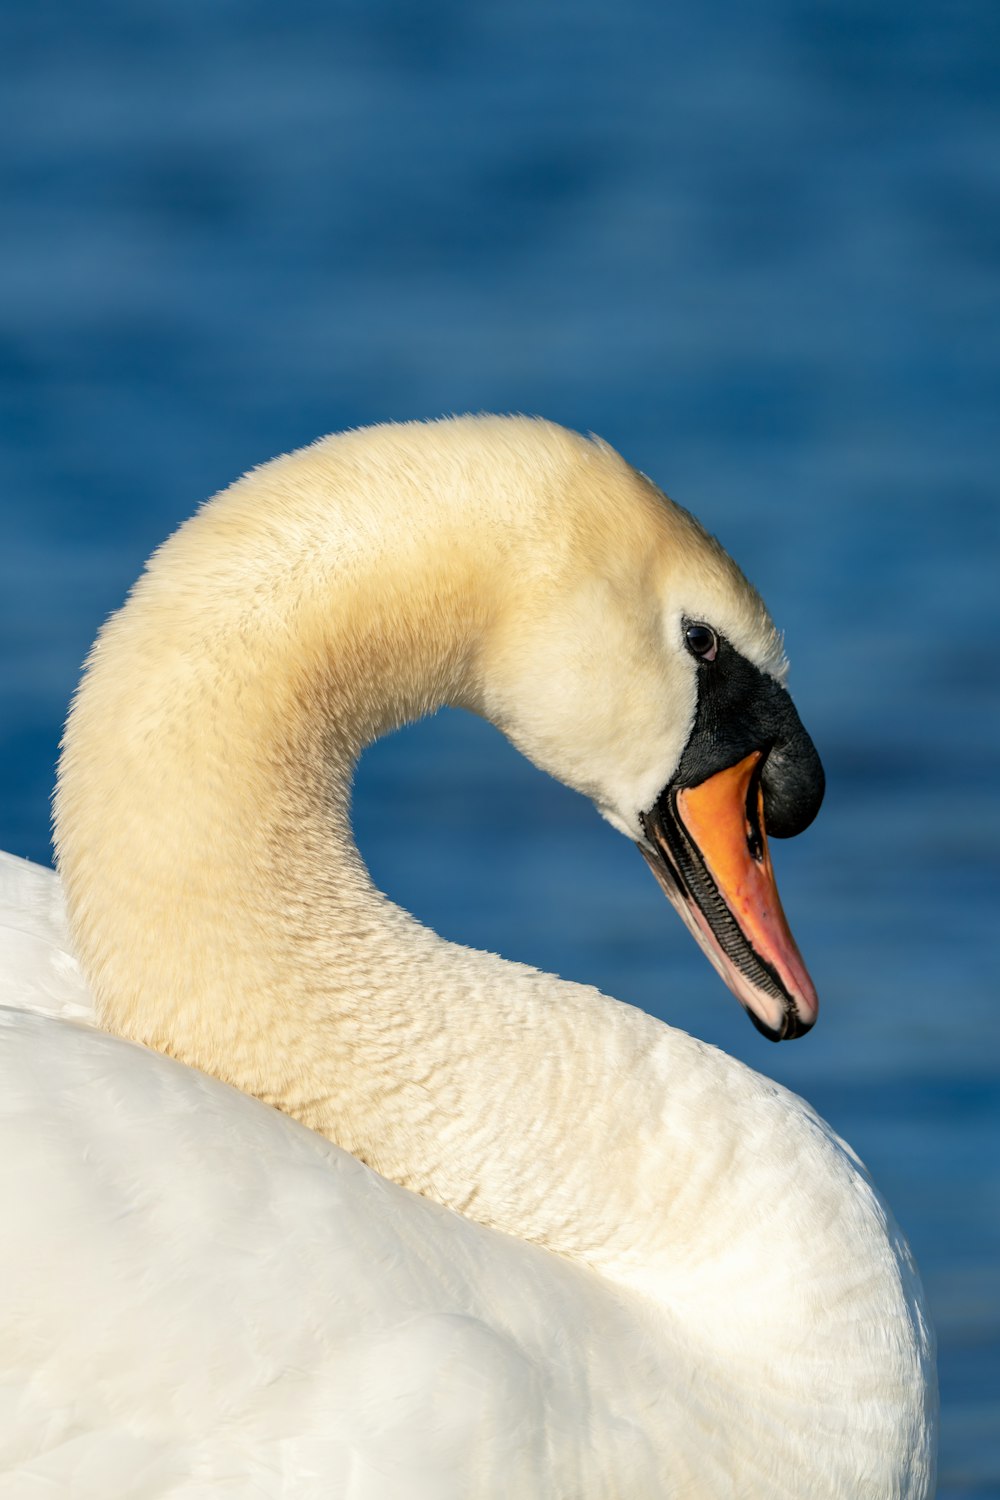 a close up of a white swan near a body of water